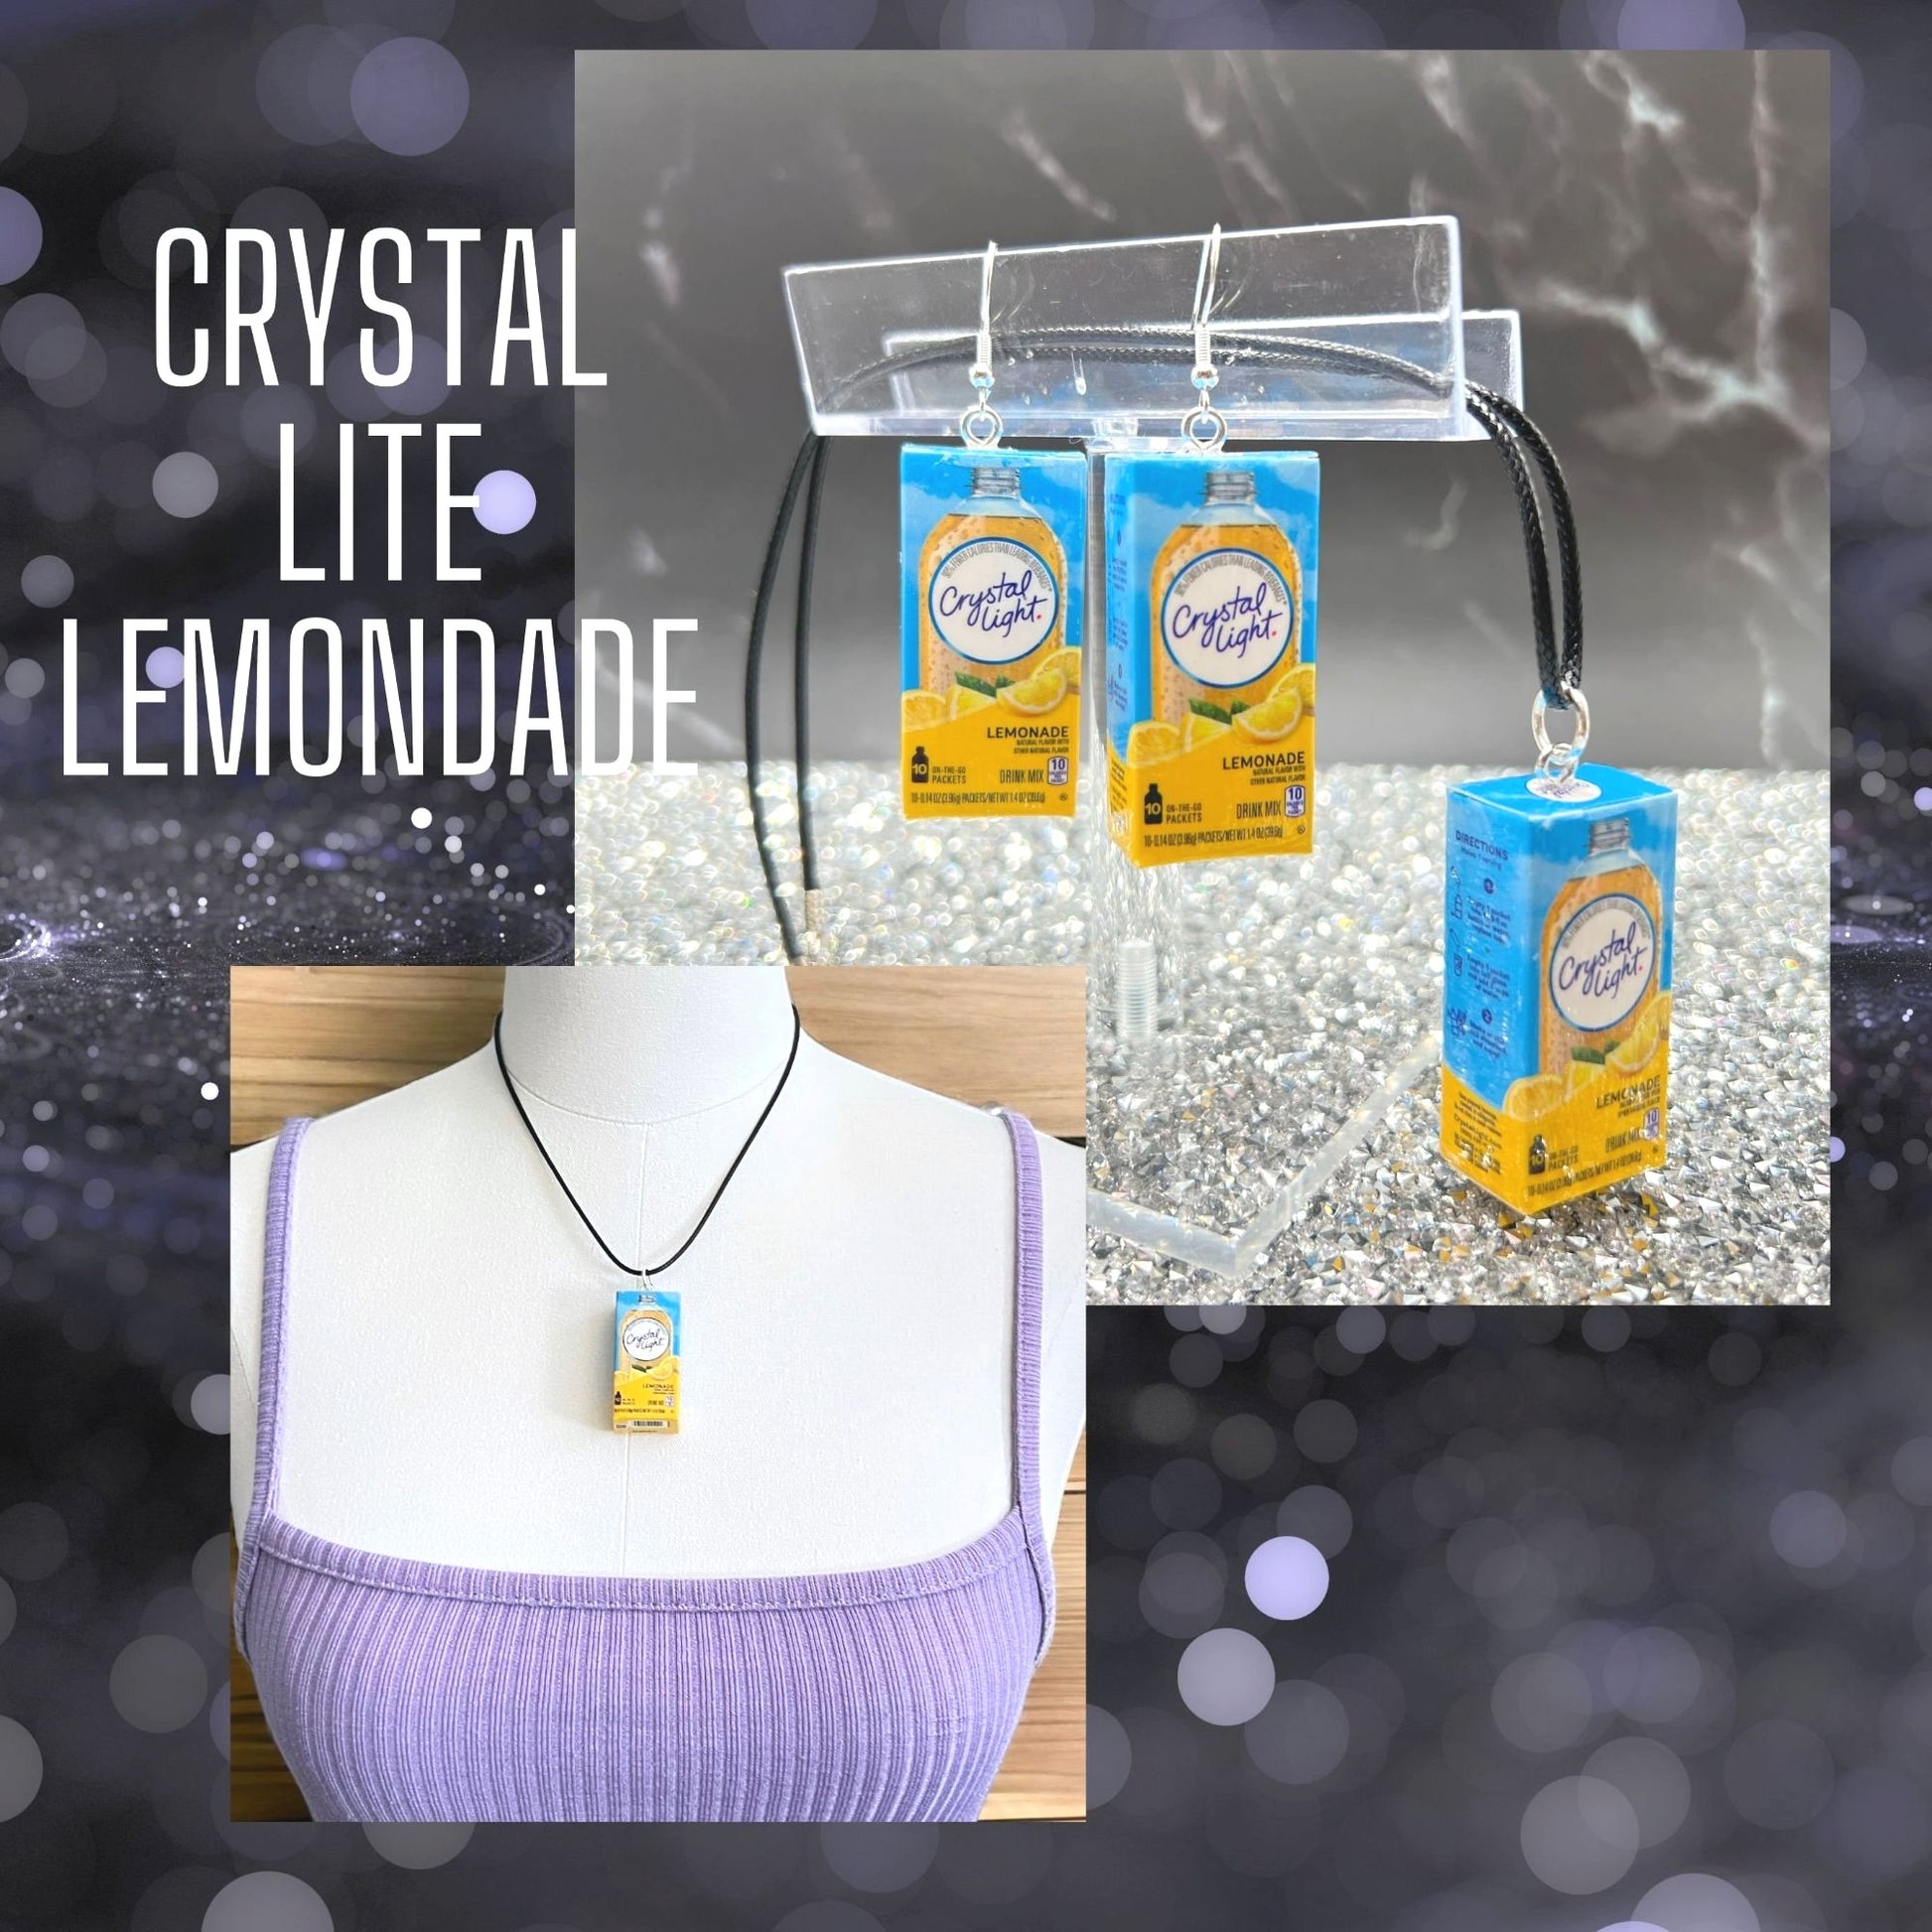 Quirky Mini Food Earrings and Necklace Gift Set—funny, upcycled jewelry for a touch of whimsy. Perfect novelty gift for any occasion! Displaying the Crystal Light Lemonade set.